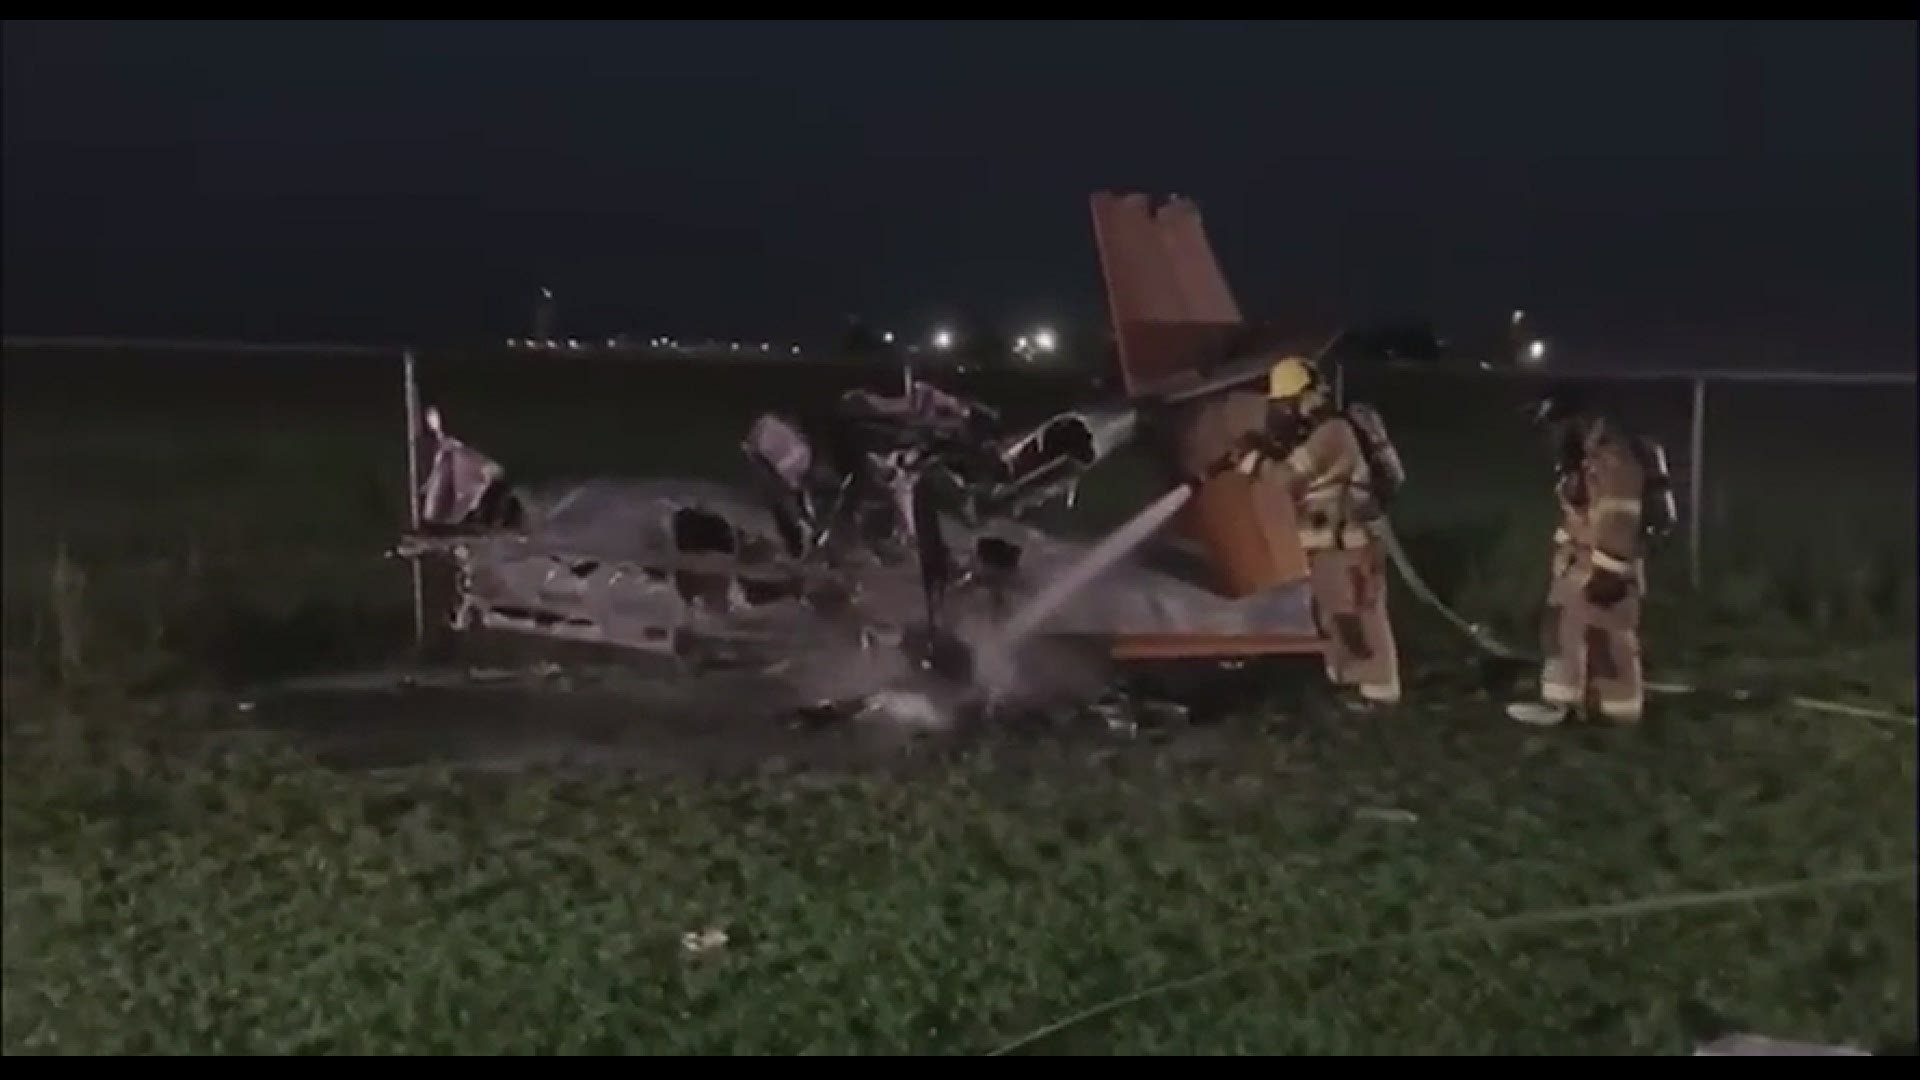 Robert Greene took this video after a plane crash at the San Marcos Regional Airport on Thursday evening.